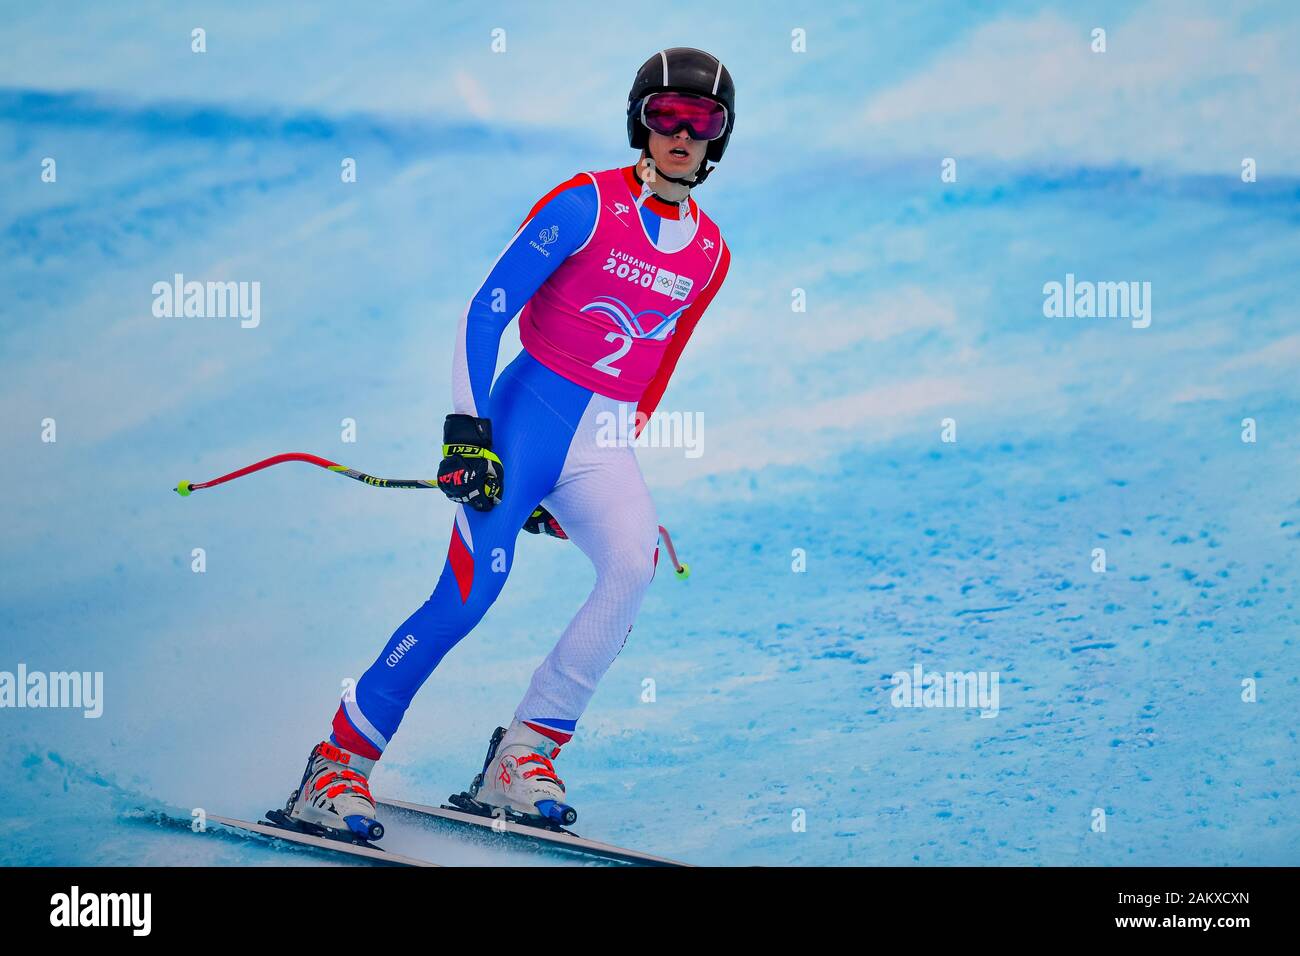 LAUSANNE, SWITZERLAND. 10th, Jan 2020. SAMBUIS Baptiste (FRA) competes in Alpine Ski Mens Super G during the Lausanne 2020 Youth Olympic Games at Les Diablerets Alpine Centre on Friday, 10 January 2020. LAUSANNE, SWITZERLAND. Credit: Taka G Wu/Alamy Live News Stock Photo